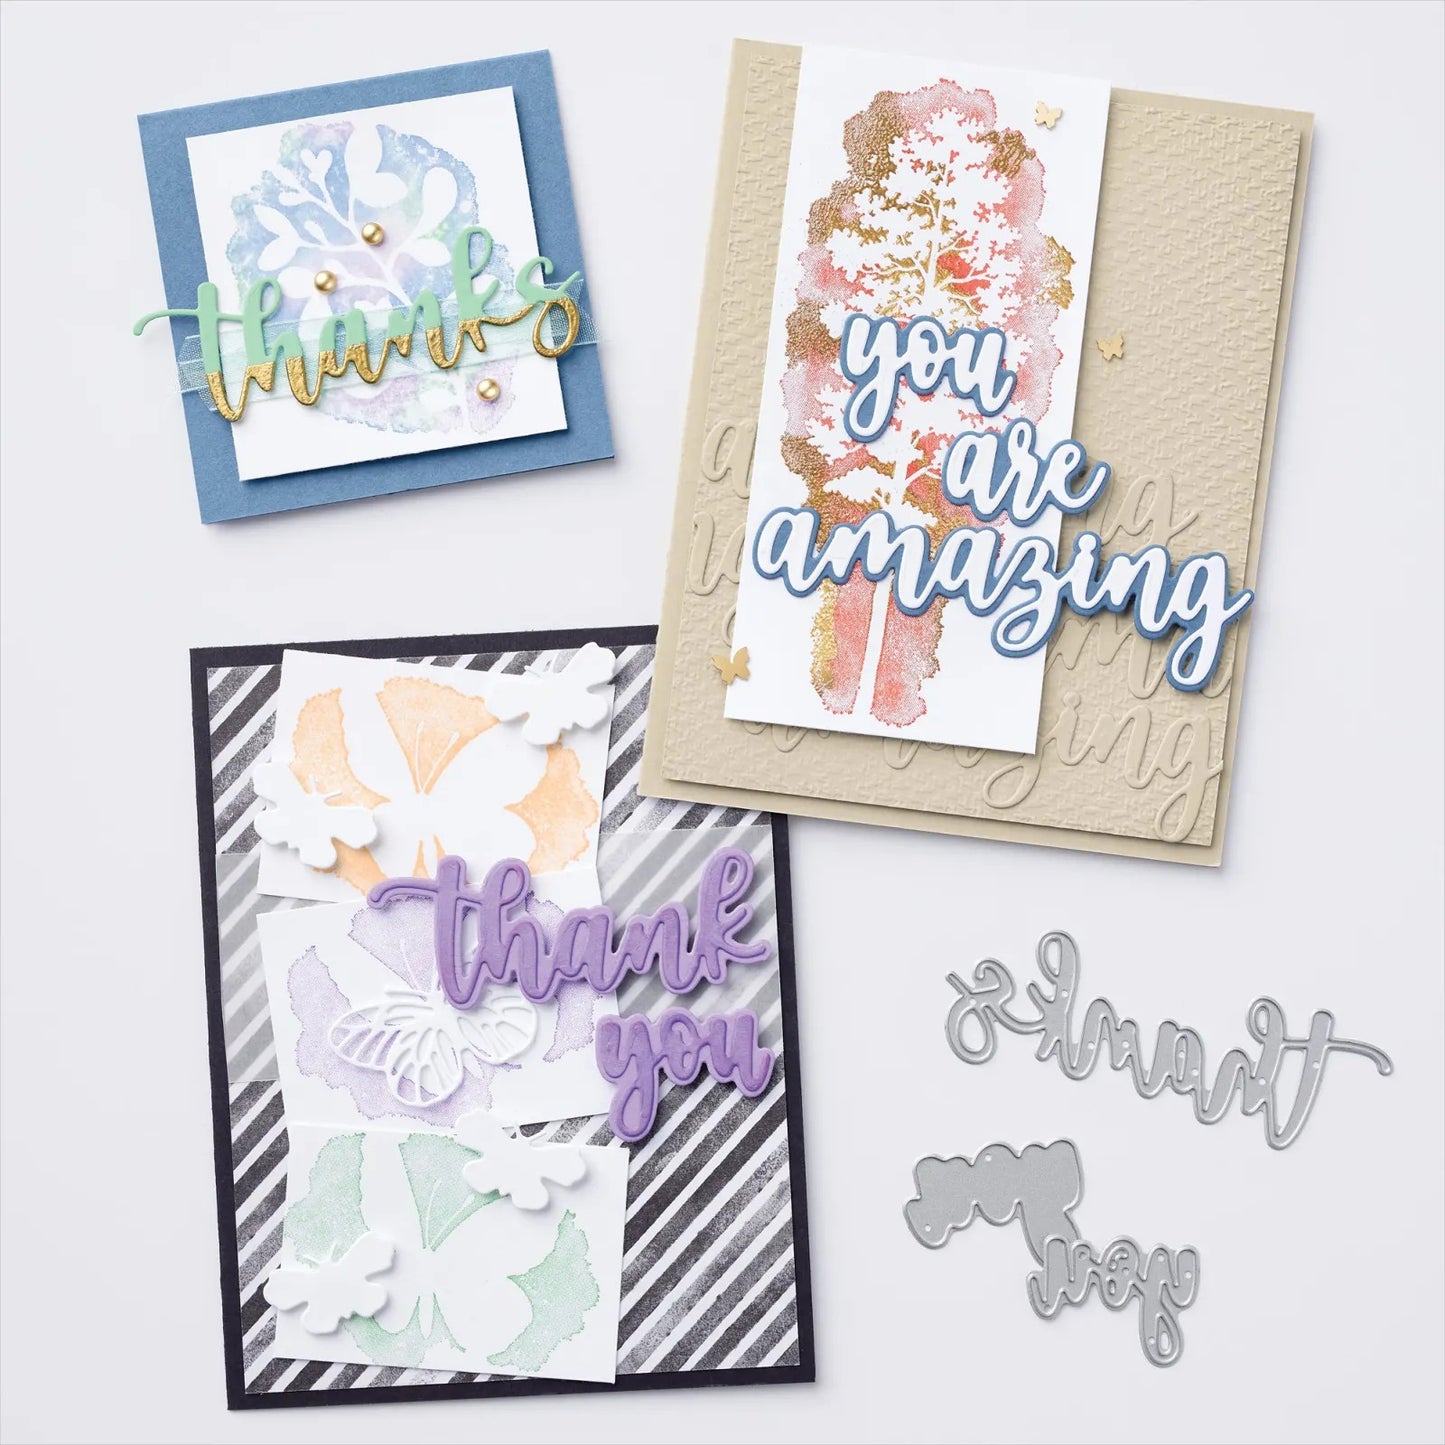 Stampin' Up! Amazing Silhouettes Bundle